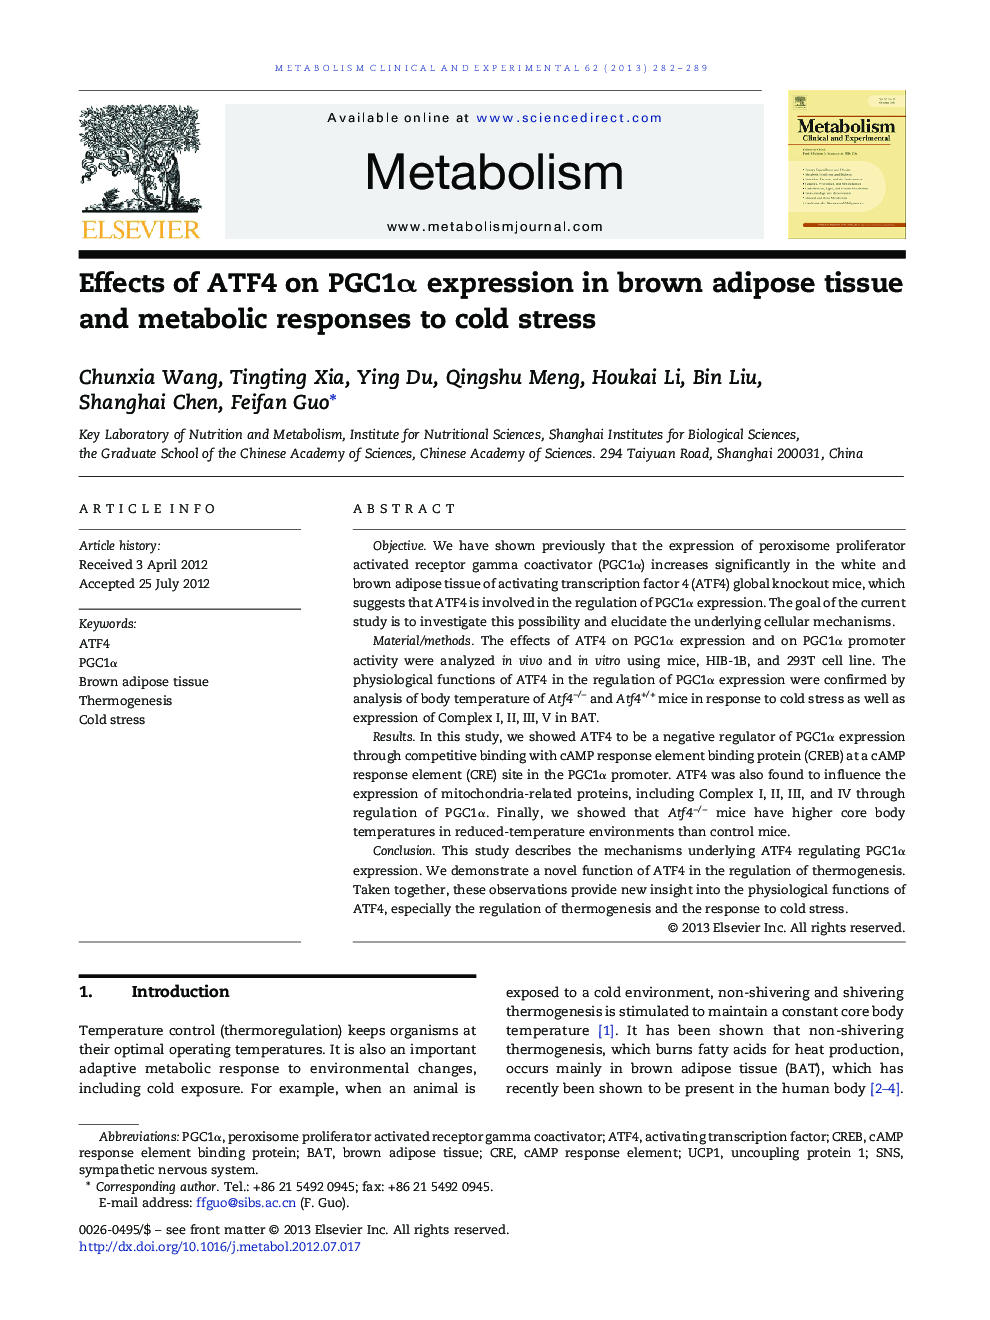 Effects of ATF4 on PGC1α expression in brown adipose tissue and metabolic responses to cold stress